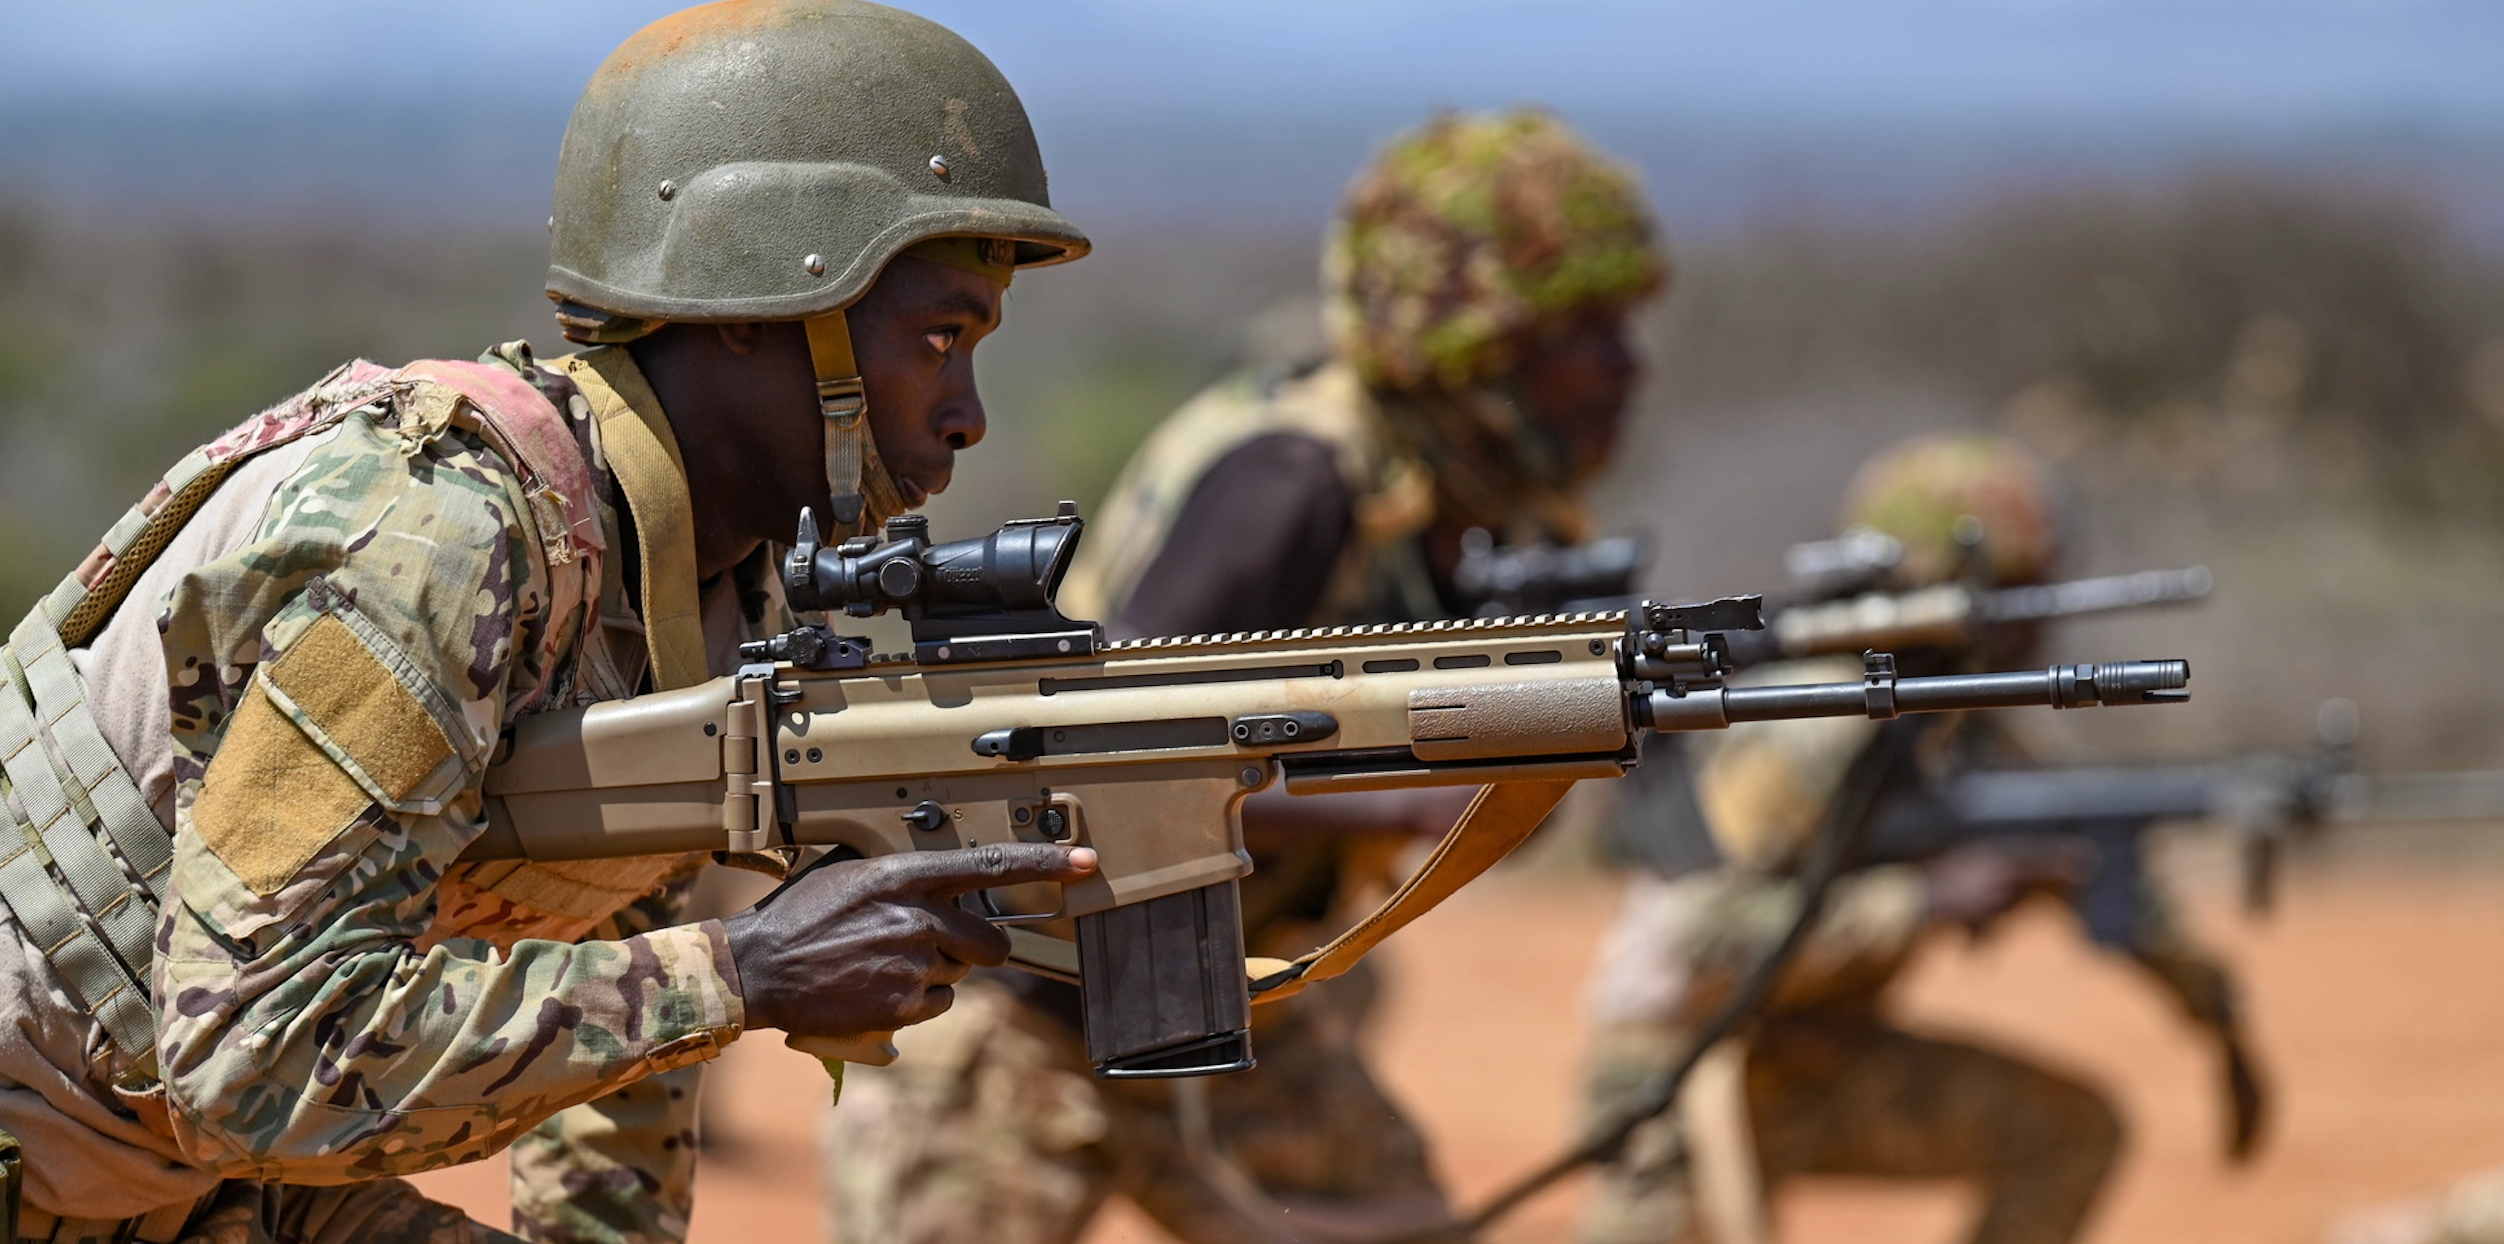 Members of the Kenyan Army are seen training a Joint Combined Exchange Training (JCET) with U.S. Marines in Isiolo, Kenya